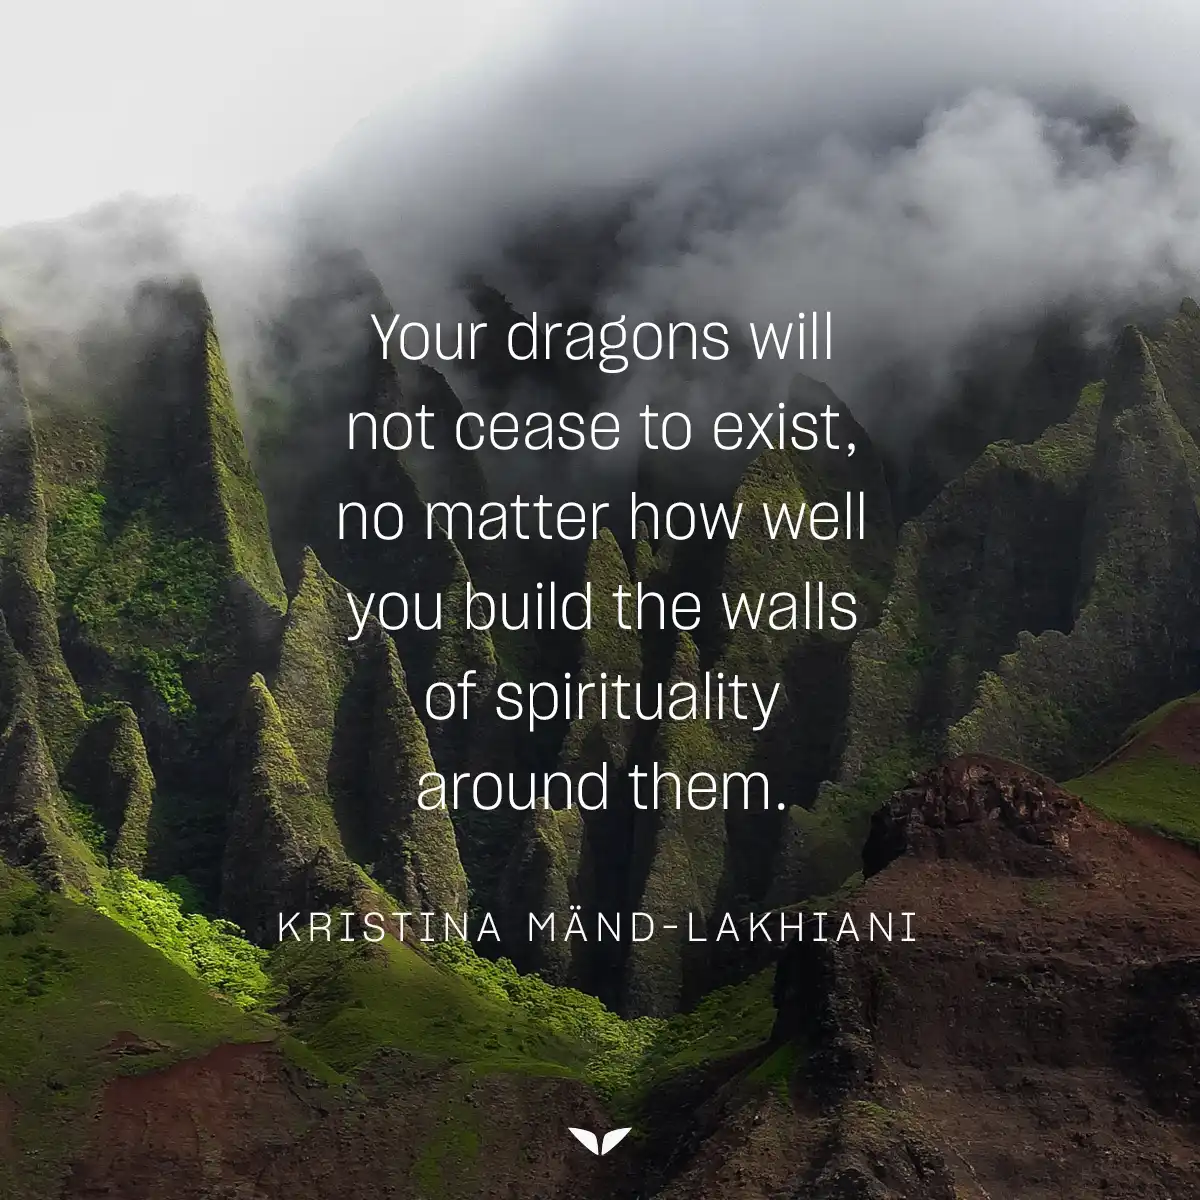 One of Kristina Mänd-Lakhiani's perfectly imperfect quote on hiding your shadow